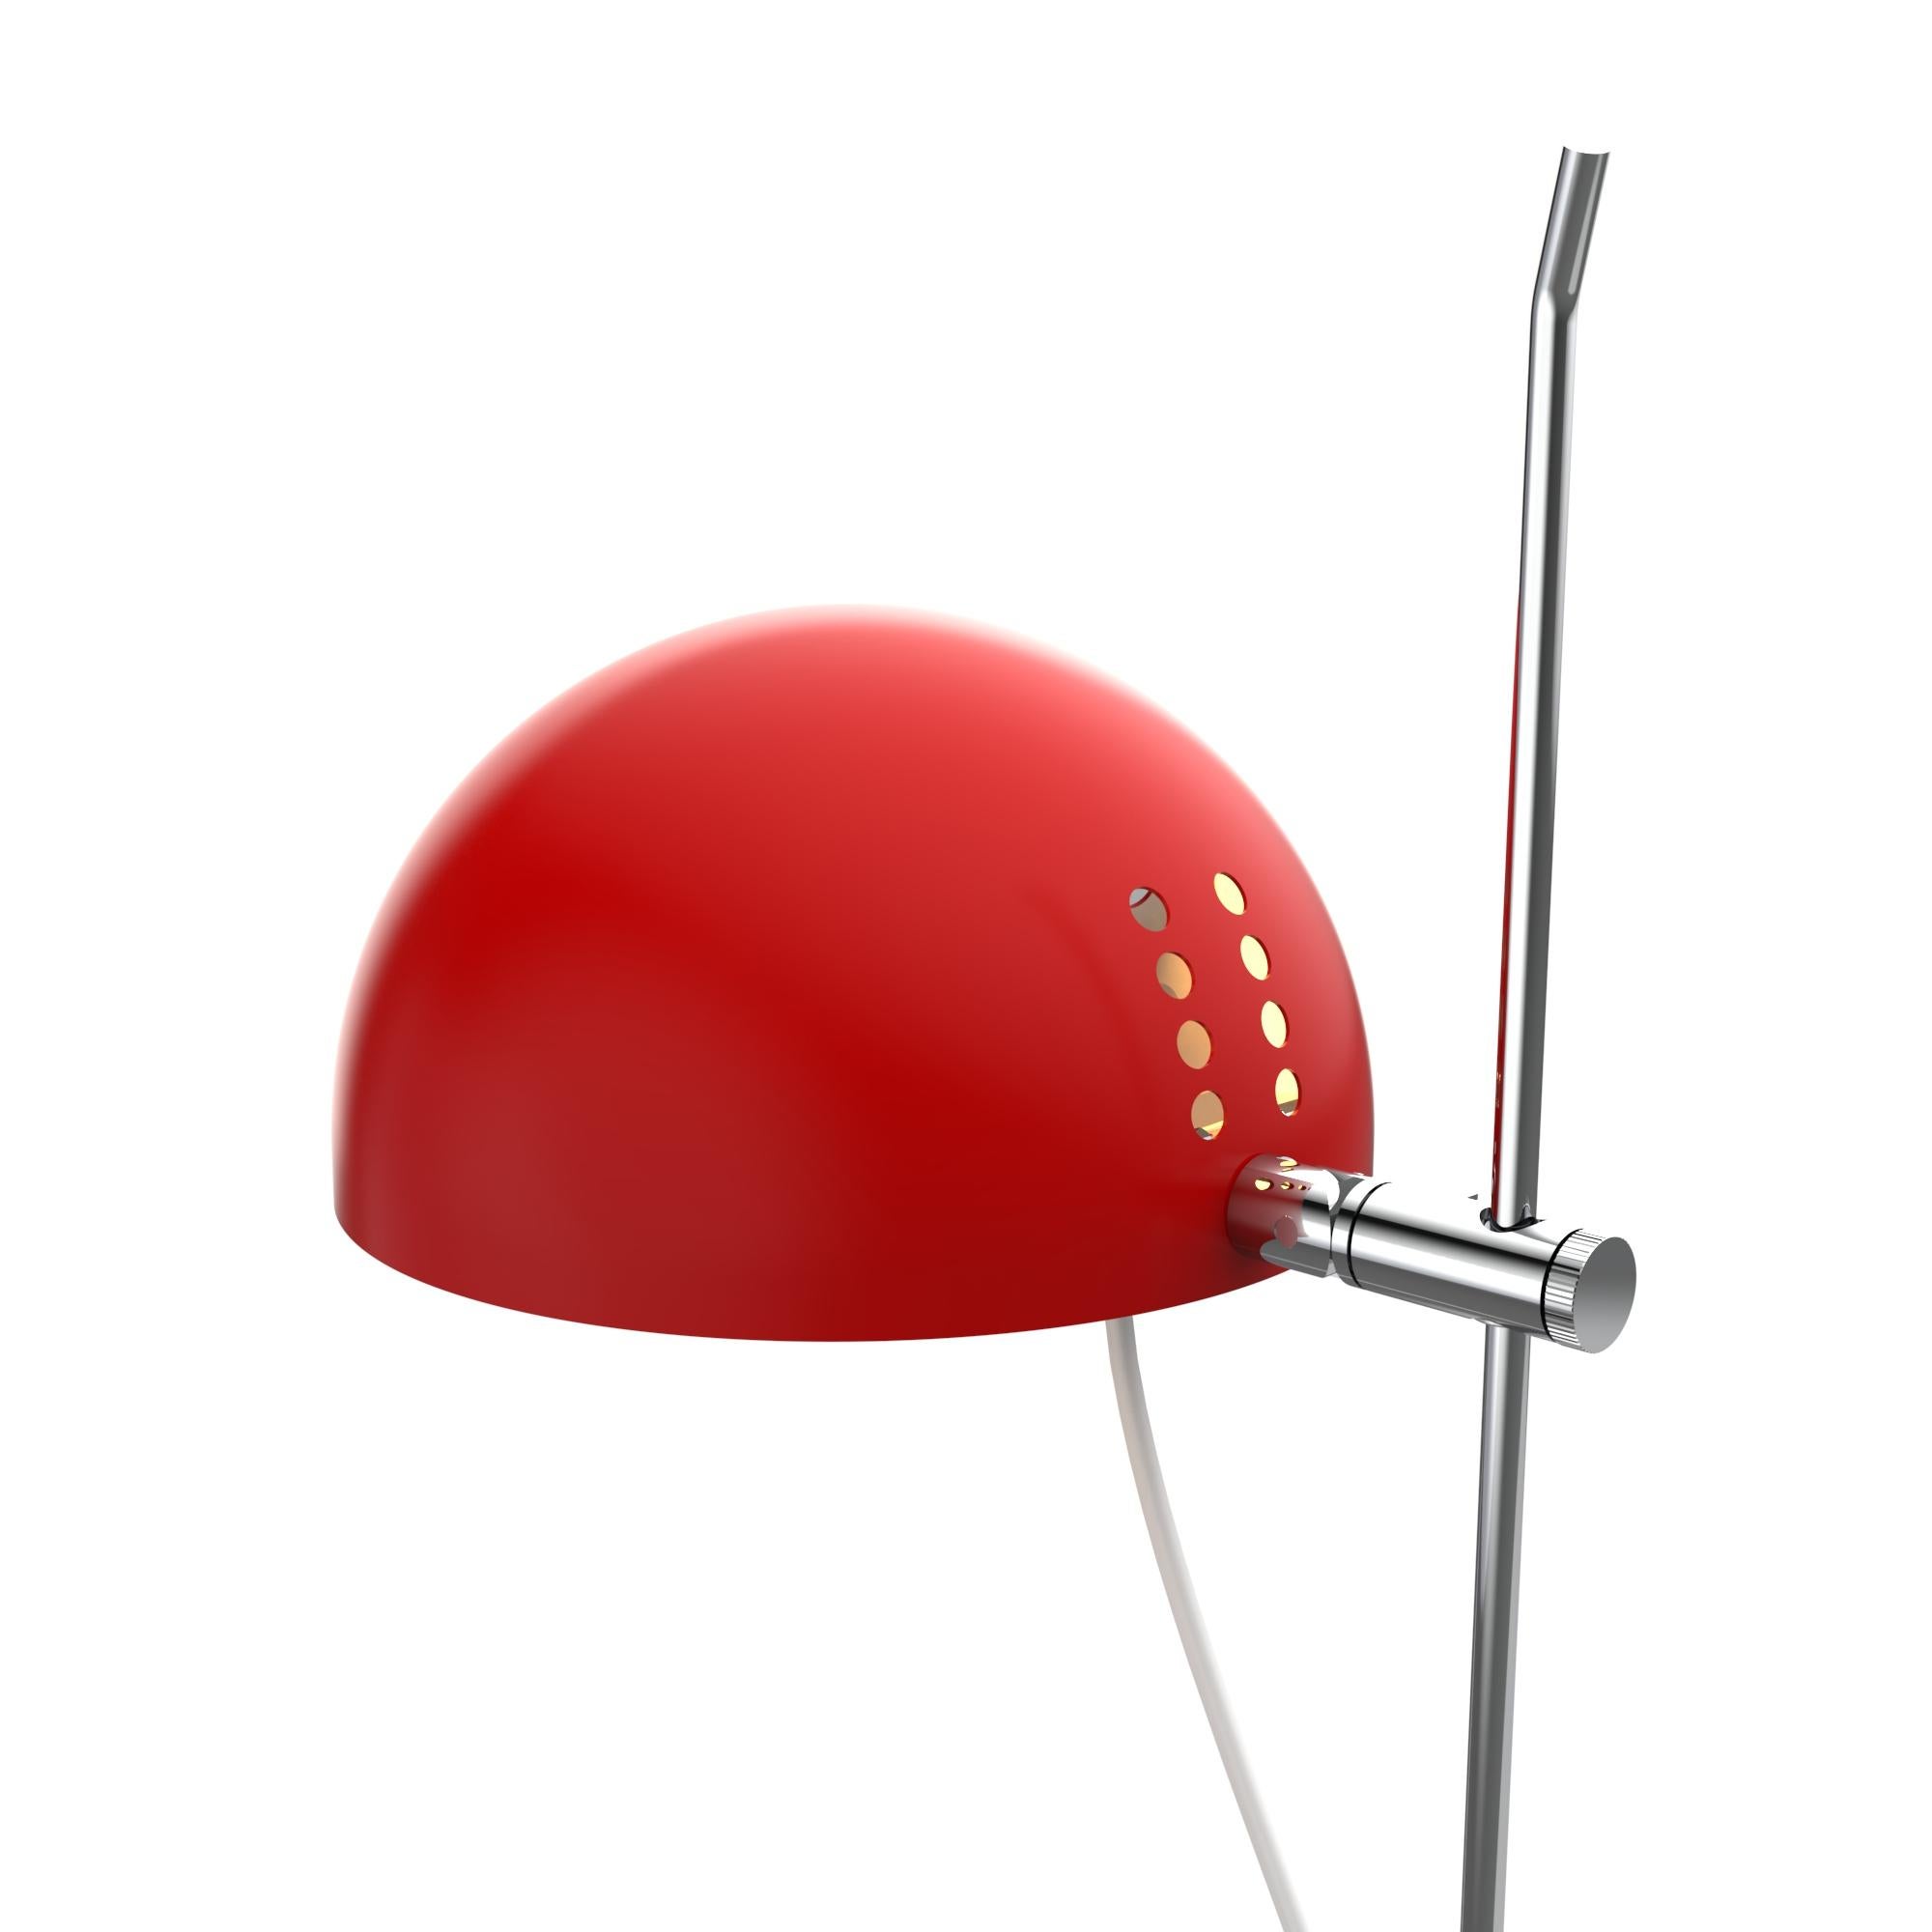 Alain Richard 'A22F' task lamp in red for Disderot.

Executed in red painted metal, this newly produced numbered edition with included certificate of authenticity is made in France by Disderot with many of the same small-scale manufacturing